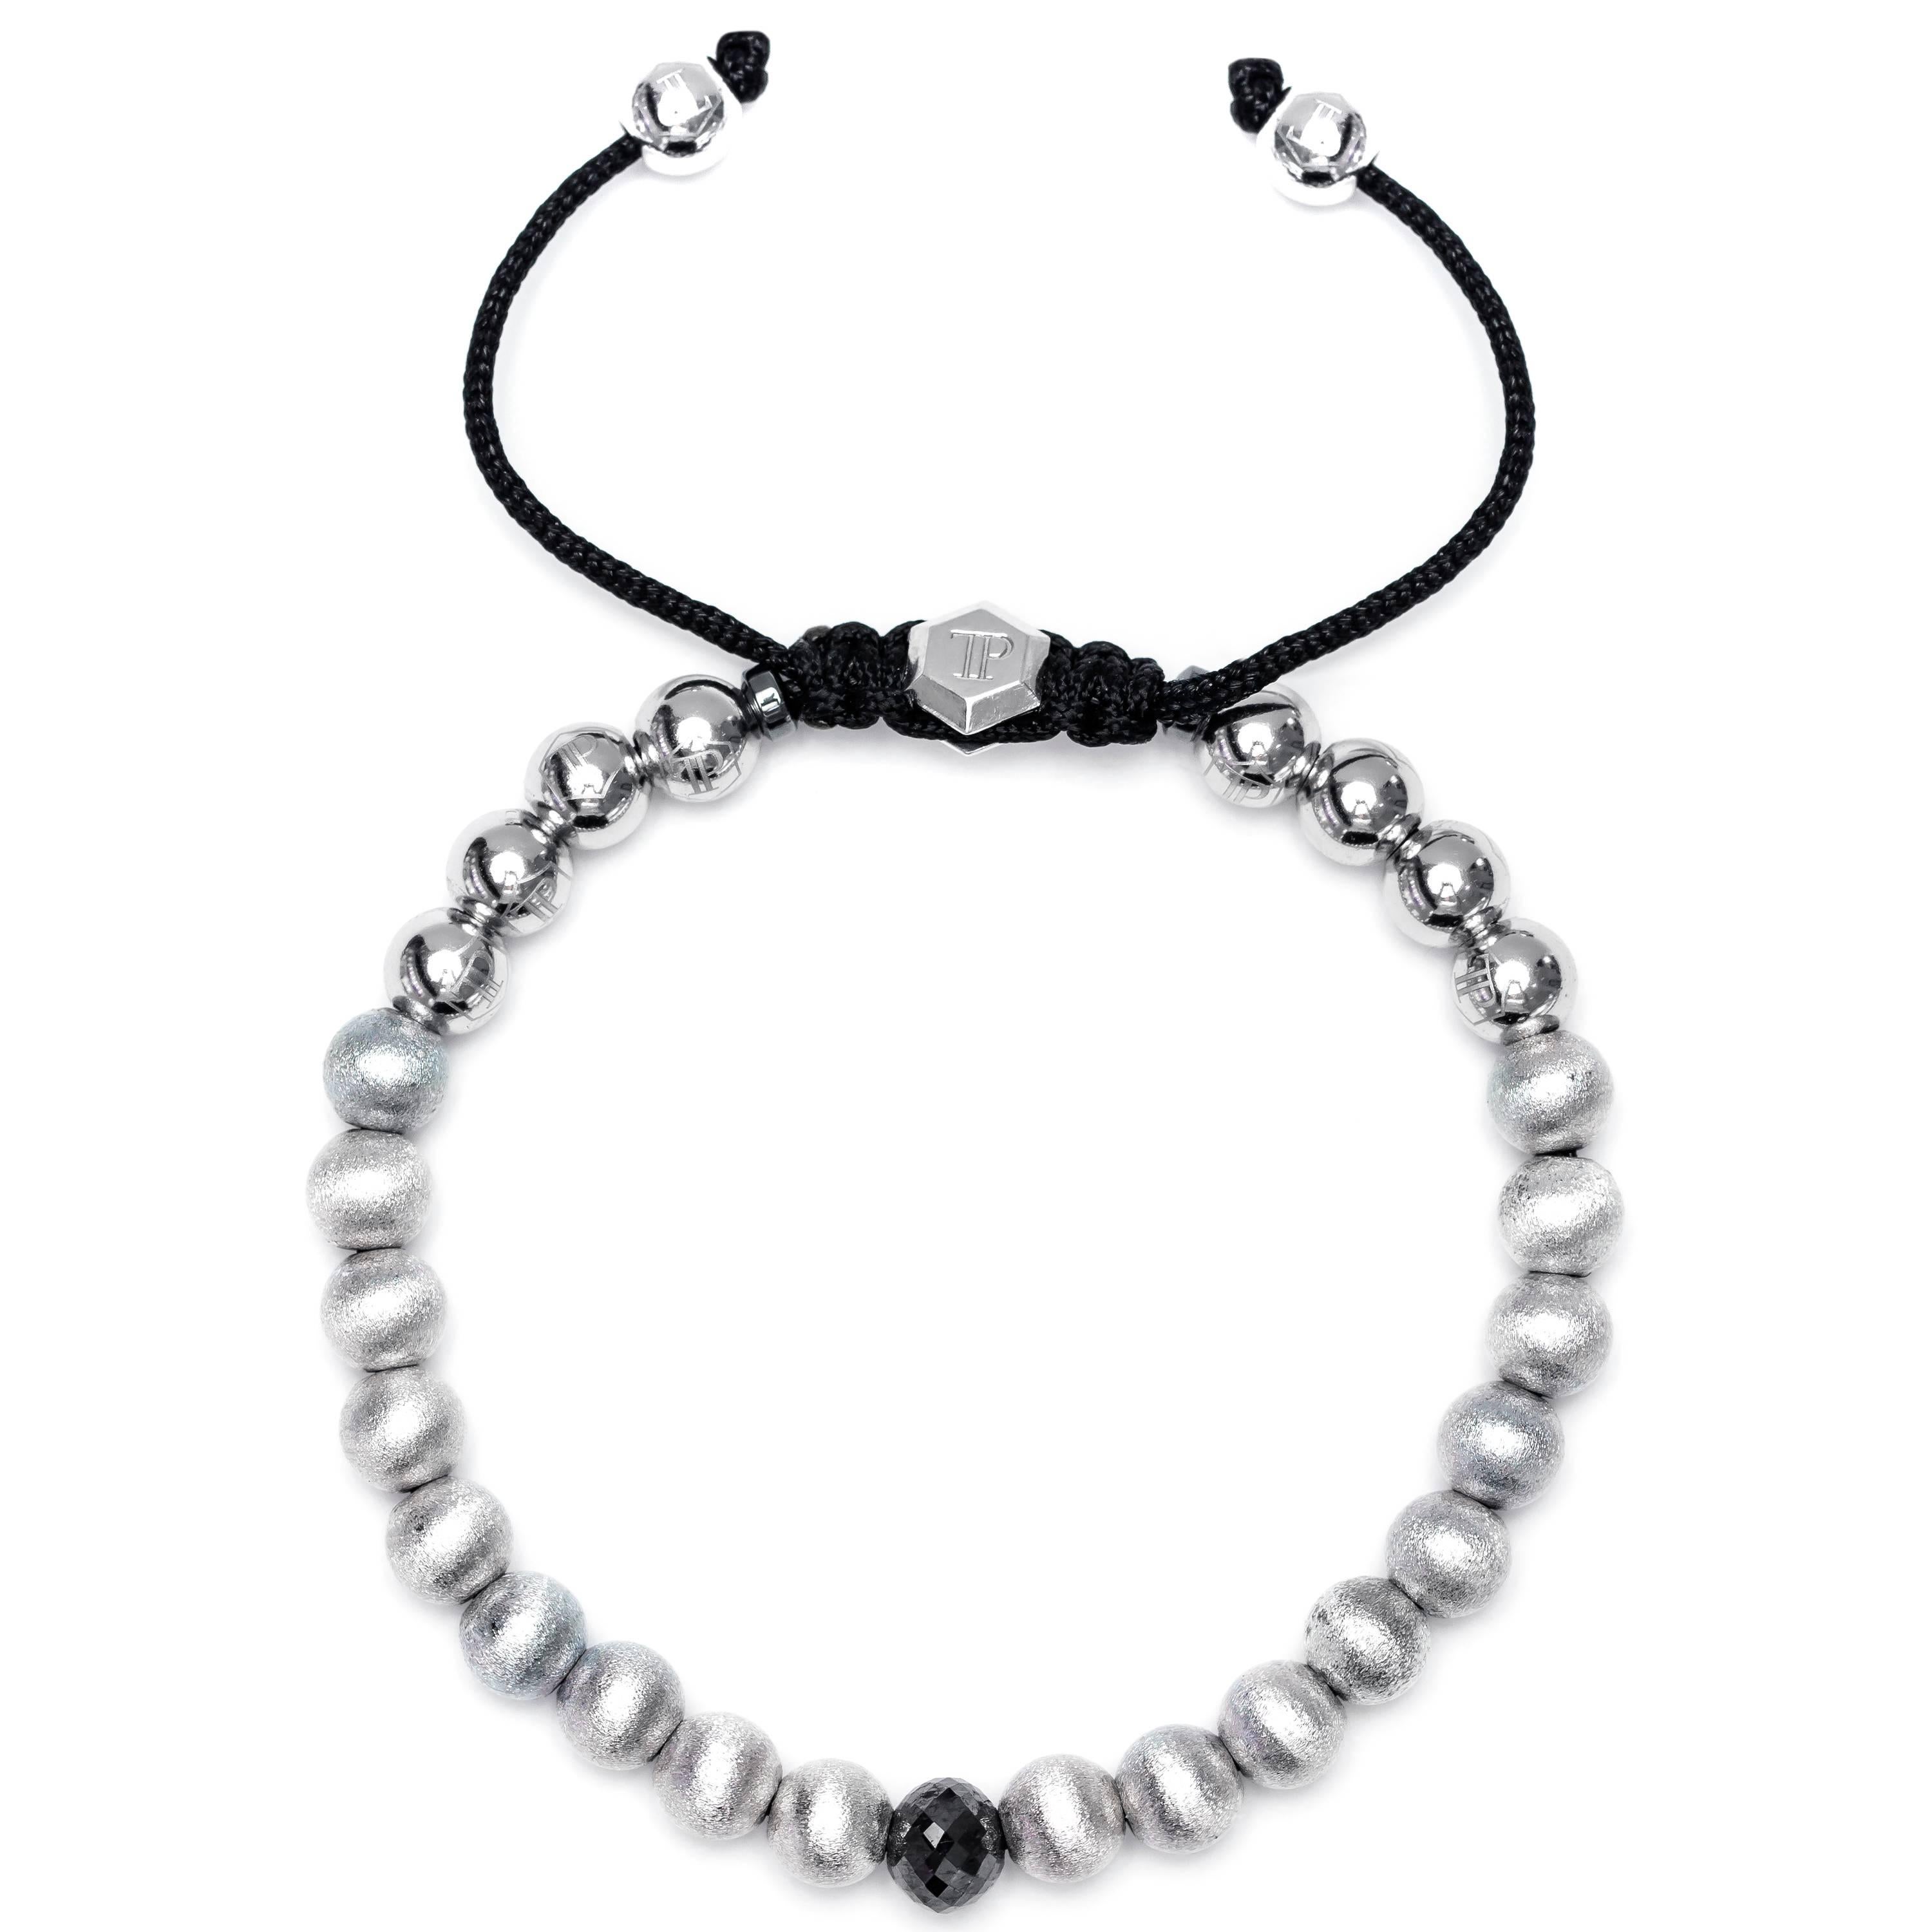 Made to order, this 1.63 Carat Black Diamond Stainless Steel and Silver beaded bracelet features 18 satin beads and 8 Stainless Steel beads and two Magnetite rings with a Silver Hexagon Tresor Paris Logo. Size will fit from 7' to 8' inches (17.78 cm